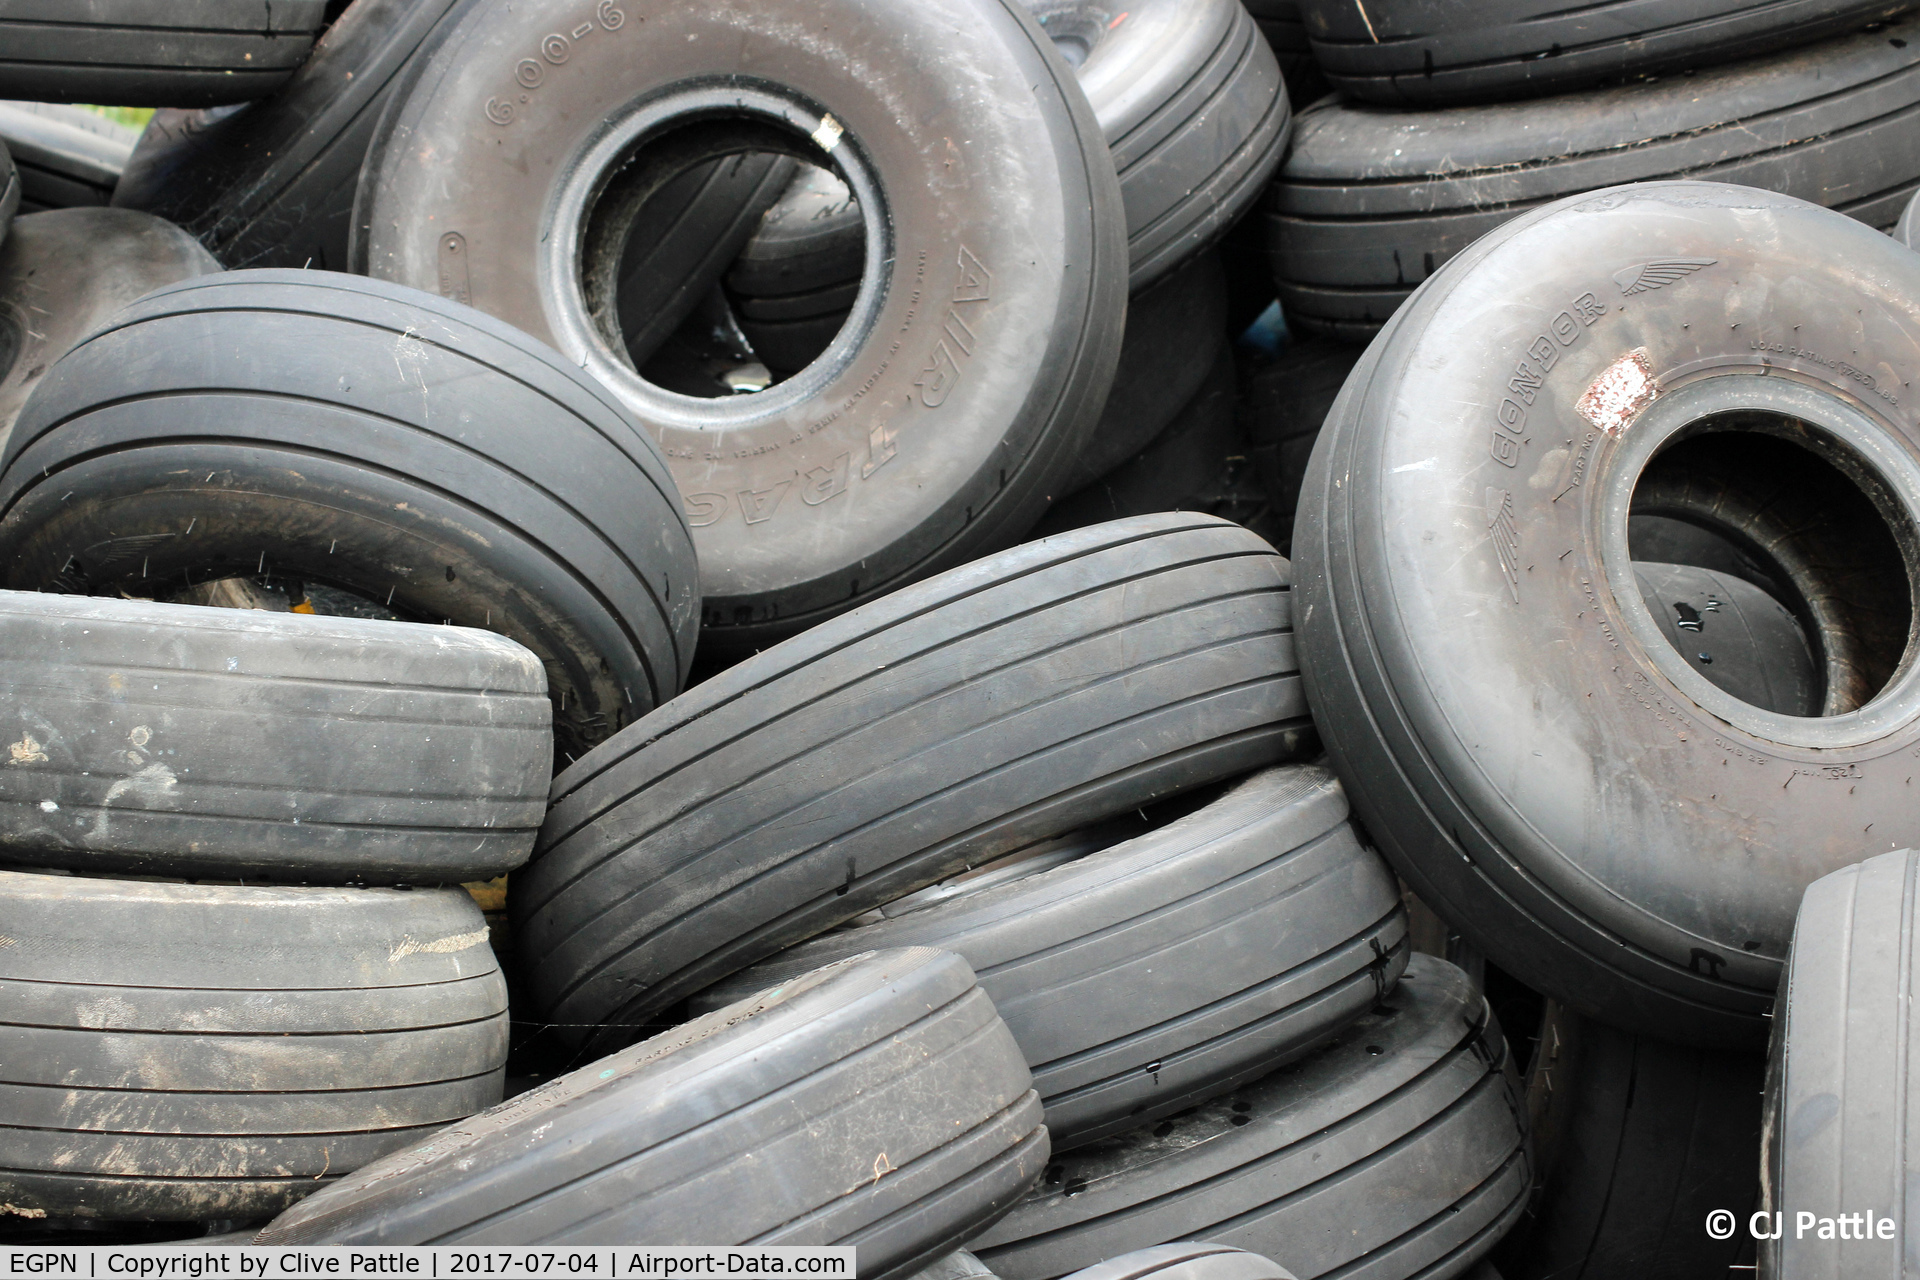 Dundee Airport, Dundee, Scotland United Kingdom (EGPN) - Looking tired at Dundee. A pile of discarded aircraft tyres await recycling at Dundee EGPN.